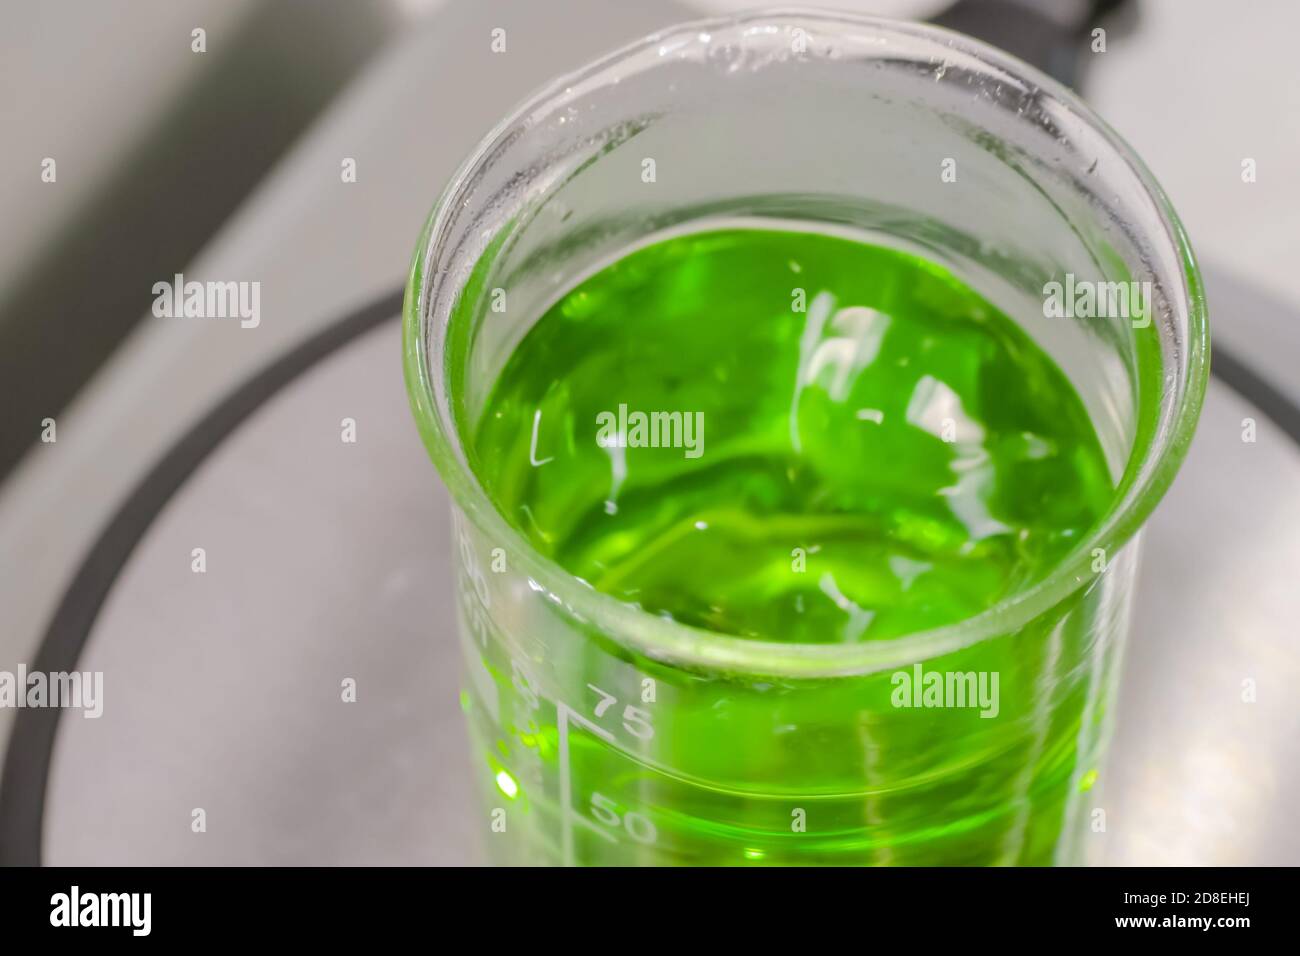 Magnetic mixer stirrer with fast moving stir bar for mixing green liquid at medical lab, exhibition: close up. Chemistry, science, pharmaceutical Stock Photo